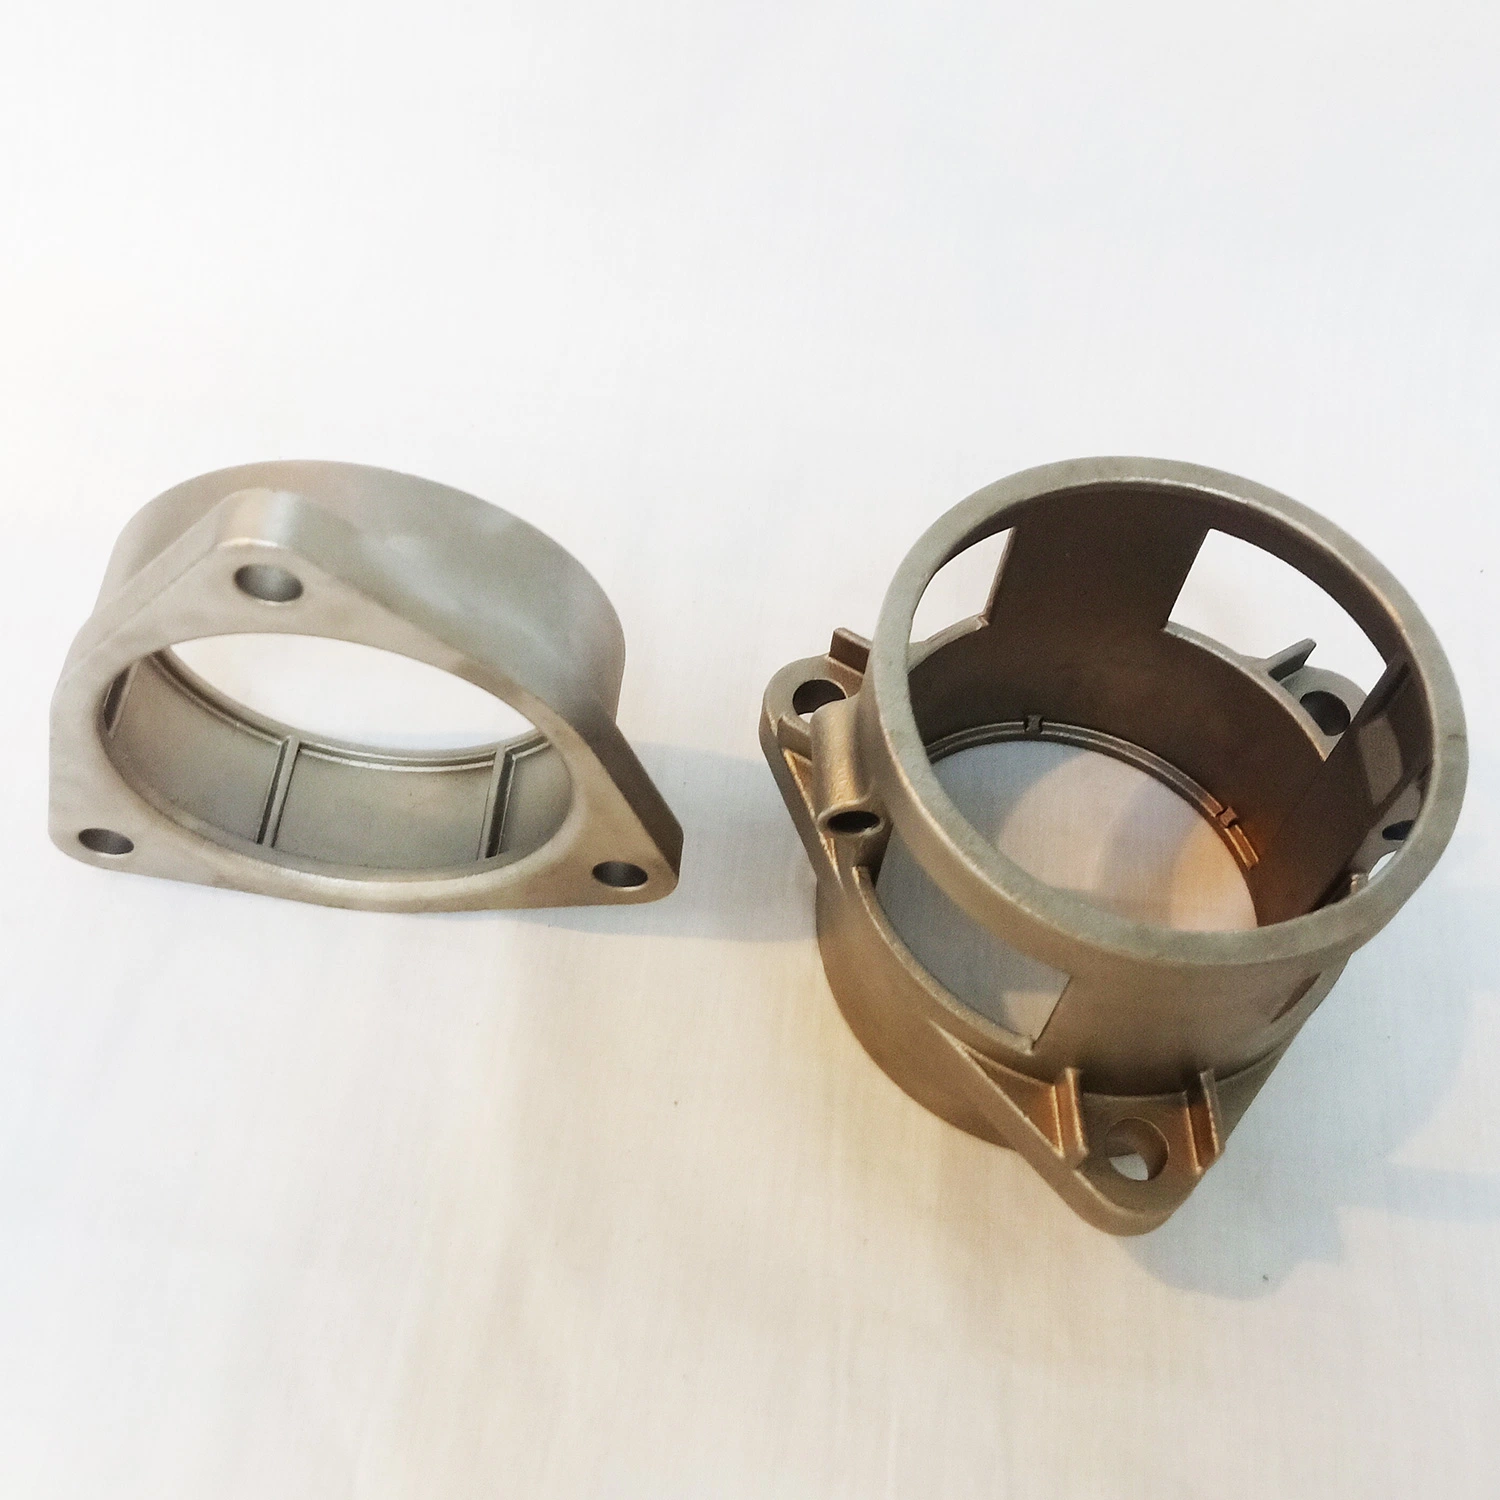 Stainless Steel Casting Lost Wax Investment Casting Foundry